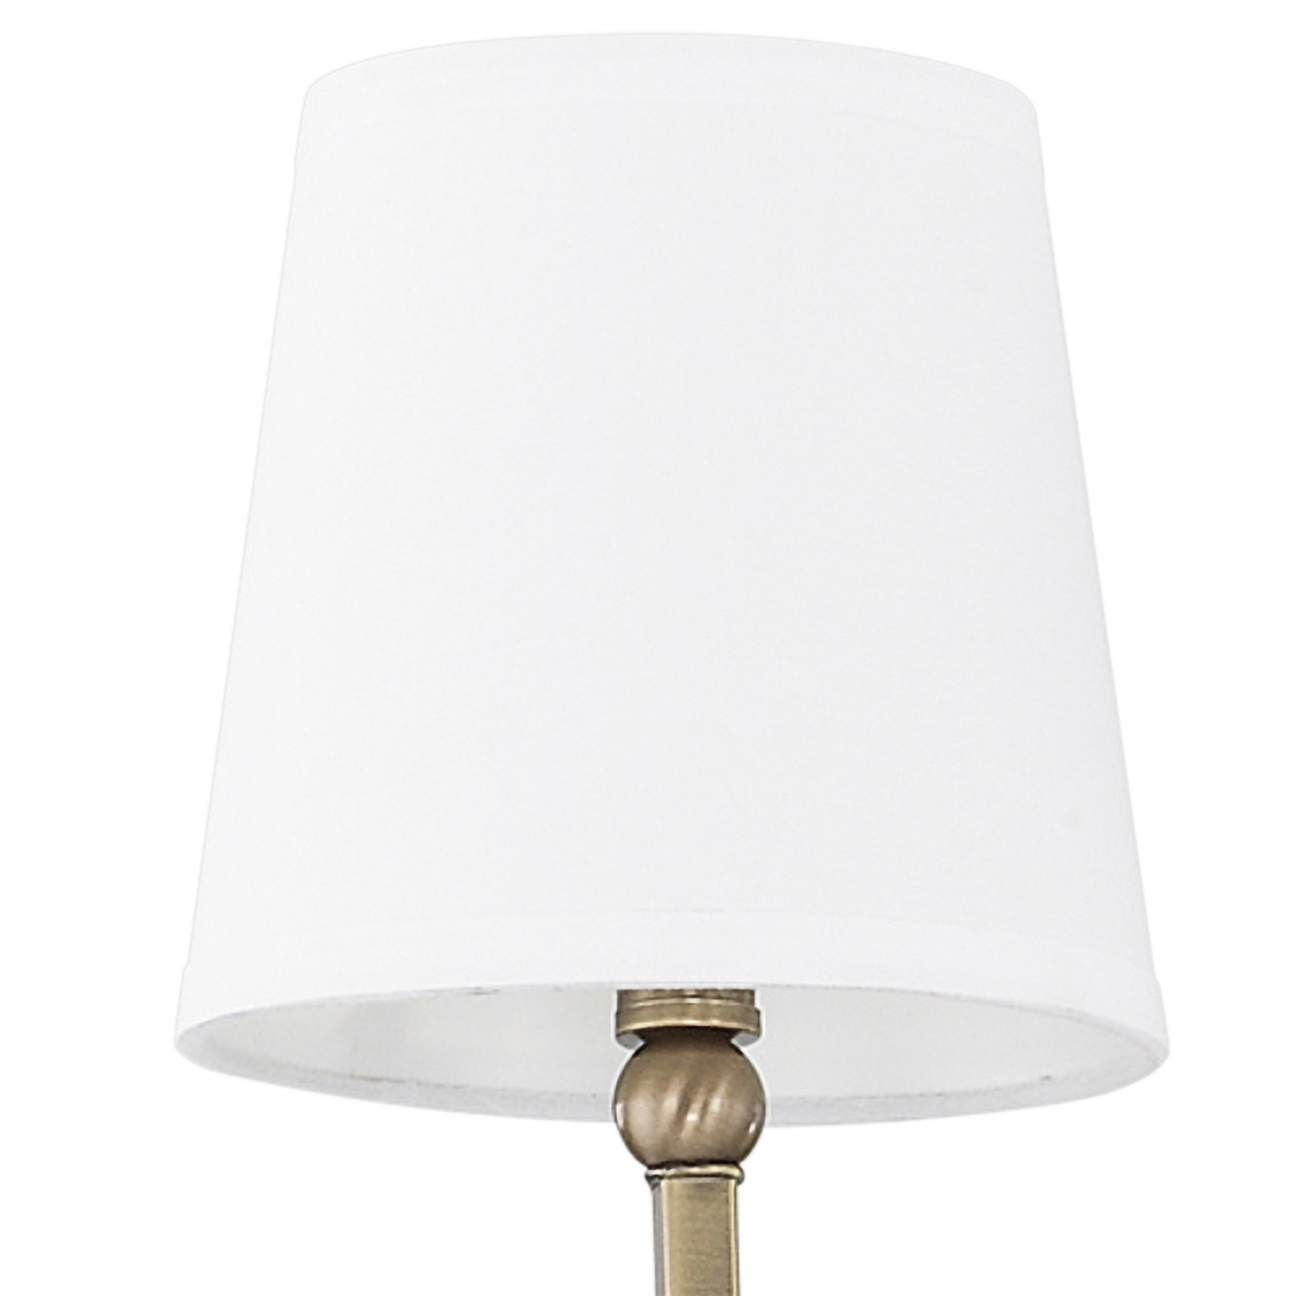 Capital Dawson 12" High Aged Brass 2-Light Wall Sconce | Lamps Plus